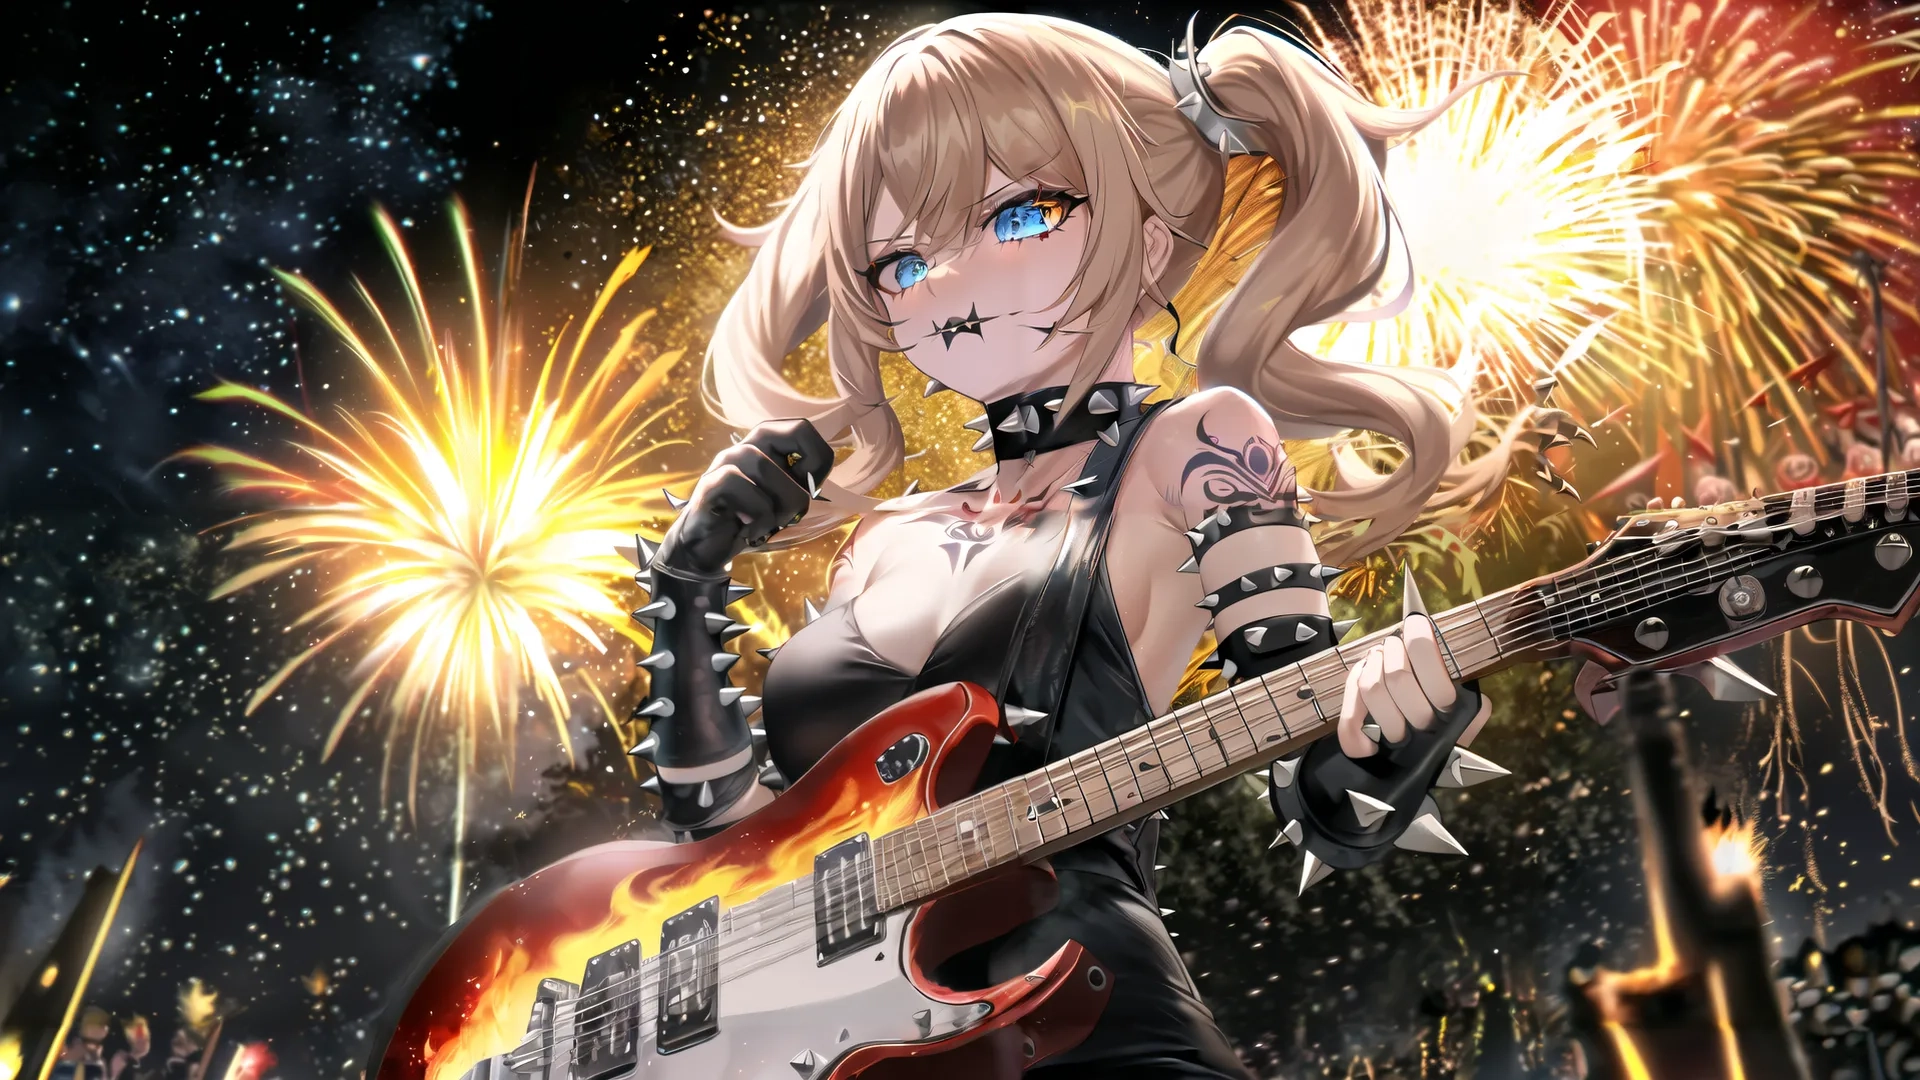 a anime guitarist plays the guitar while fireworks and water are lit in the background behind her near the city lights on the stage, all in the night
